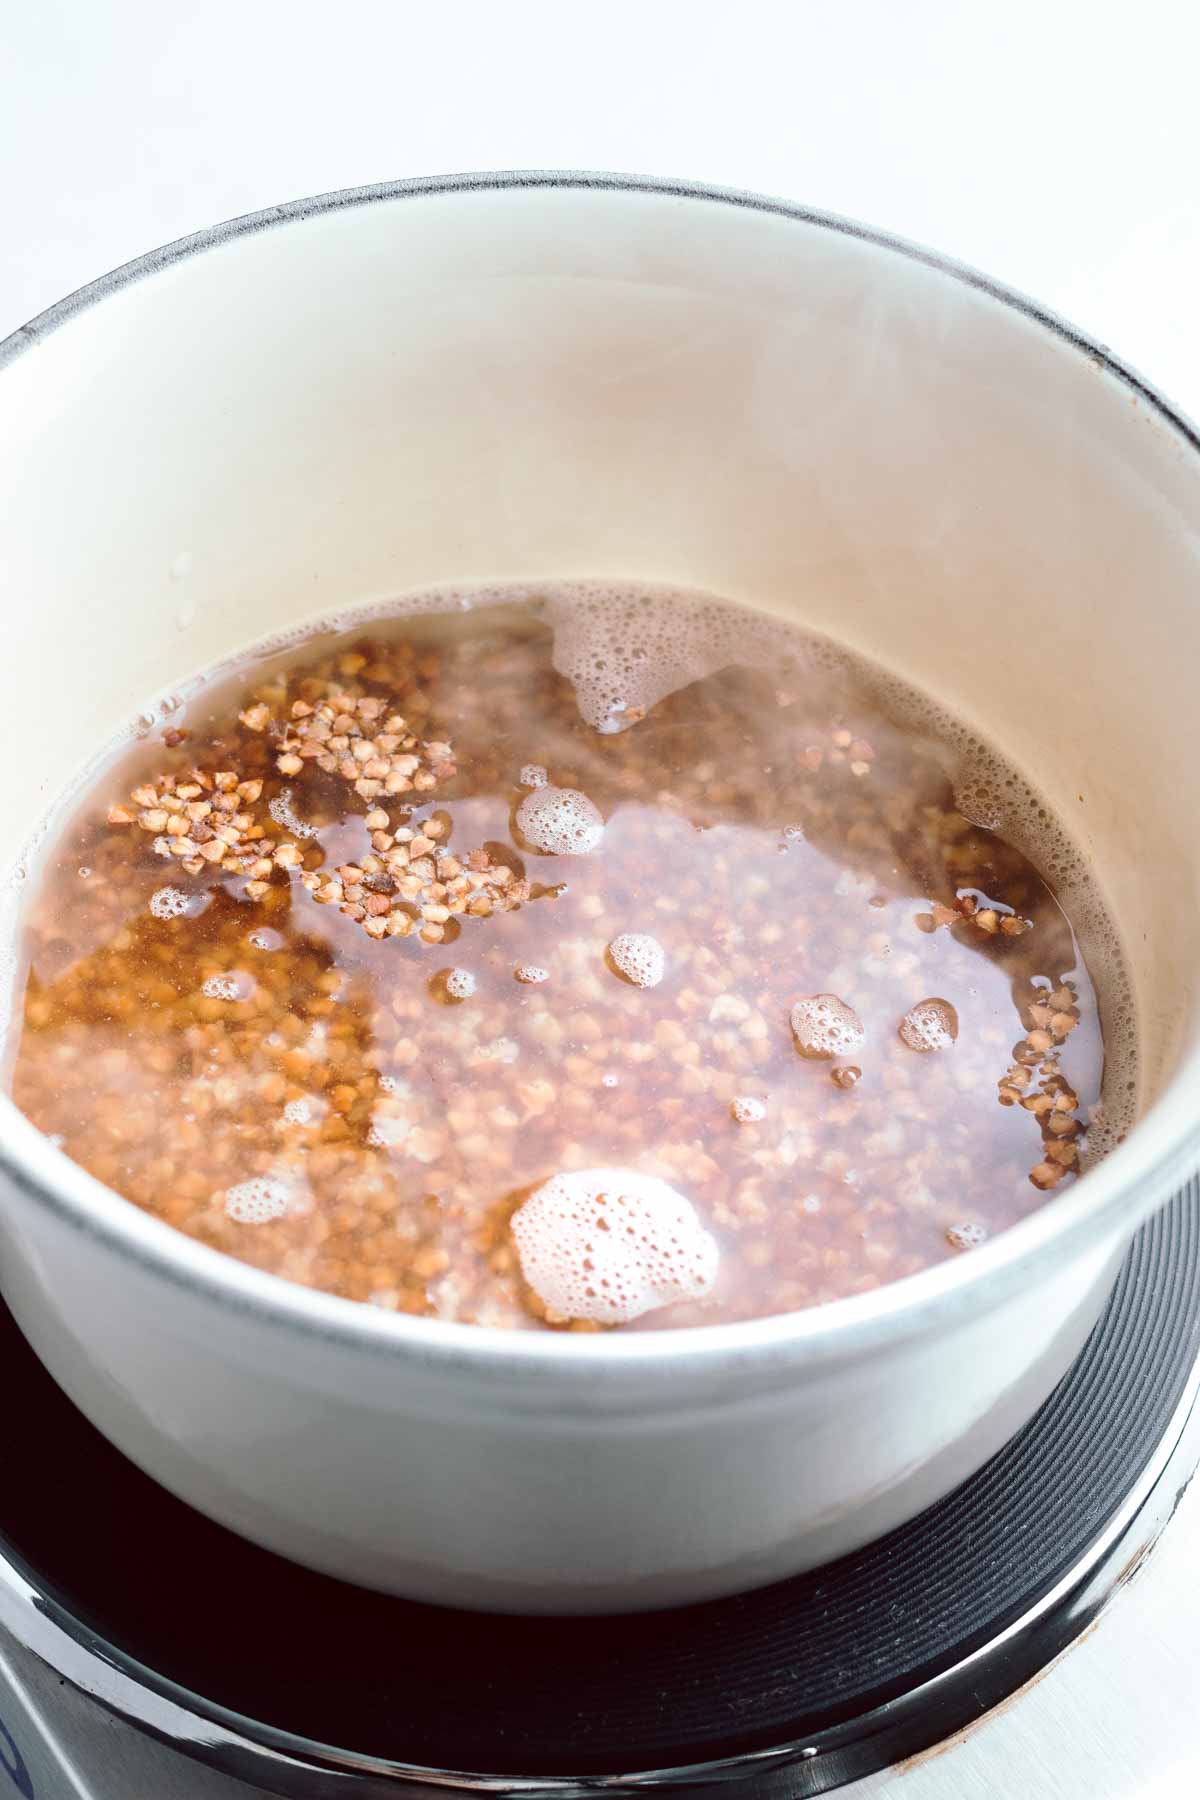 A light colored pot on a small stove with water and roasted buckwheat in it and steam coming of the water.